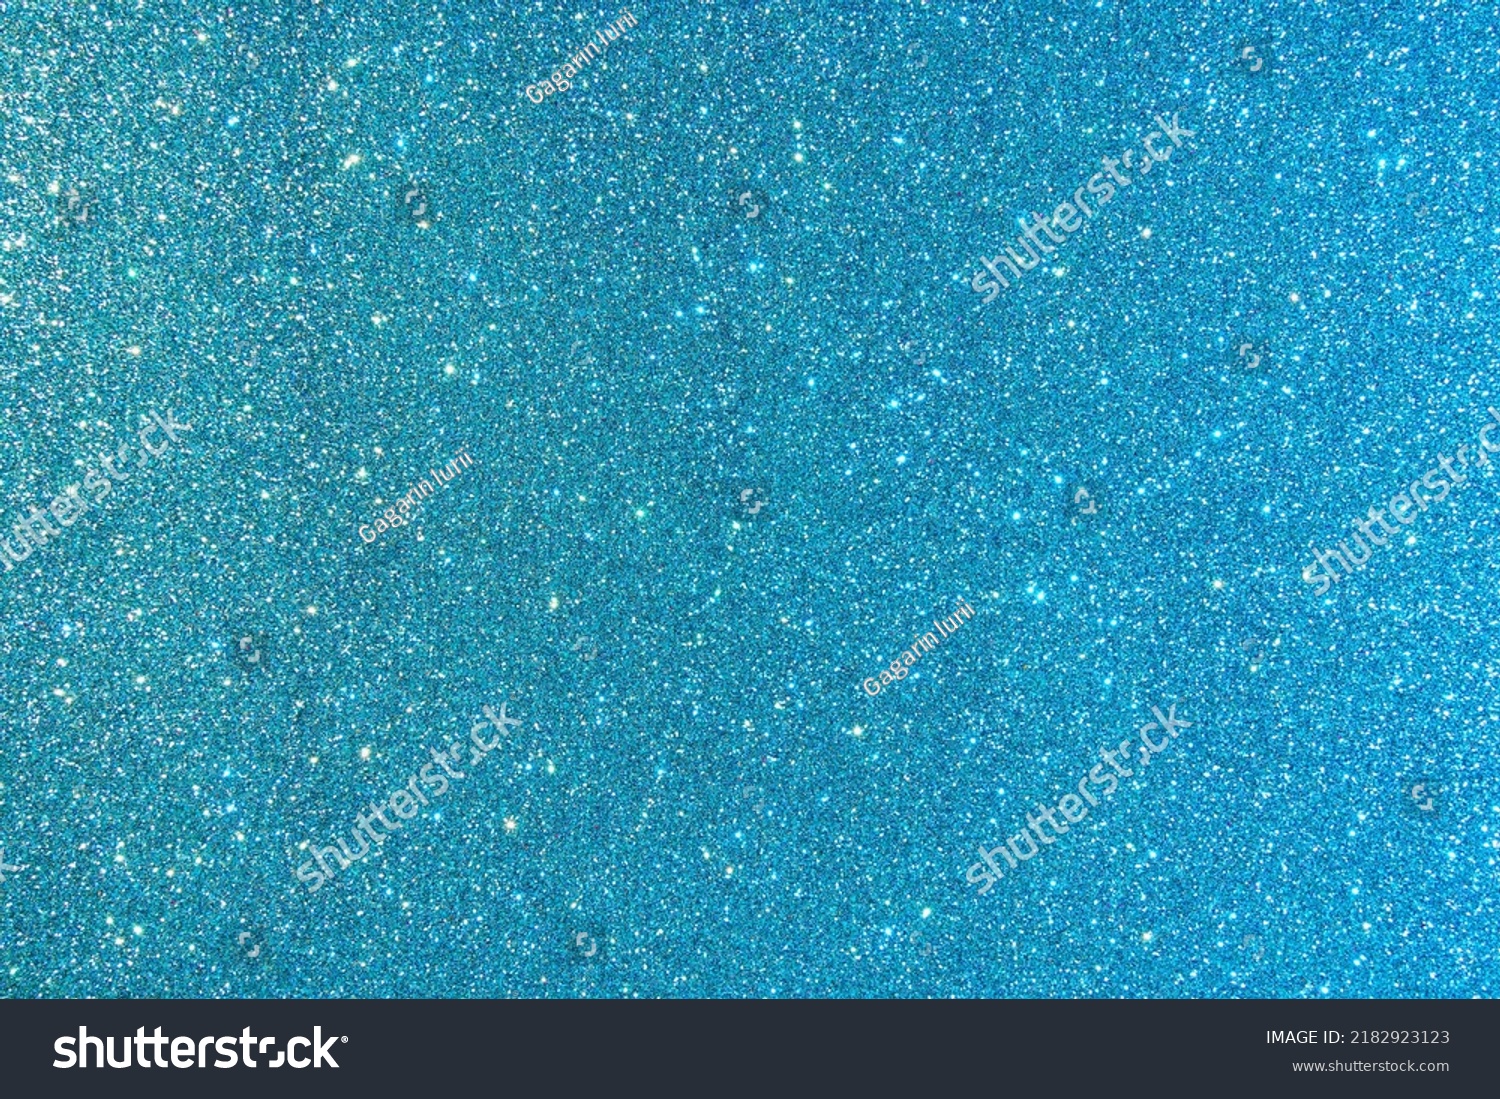 Background with sparkles. Backdrop with glitter. Shiny textured surface. Dark cyan. Mixed neon light #2182923123